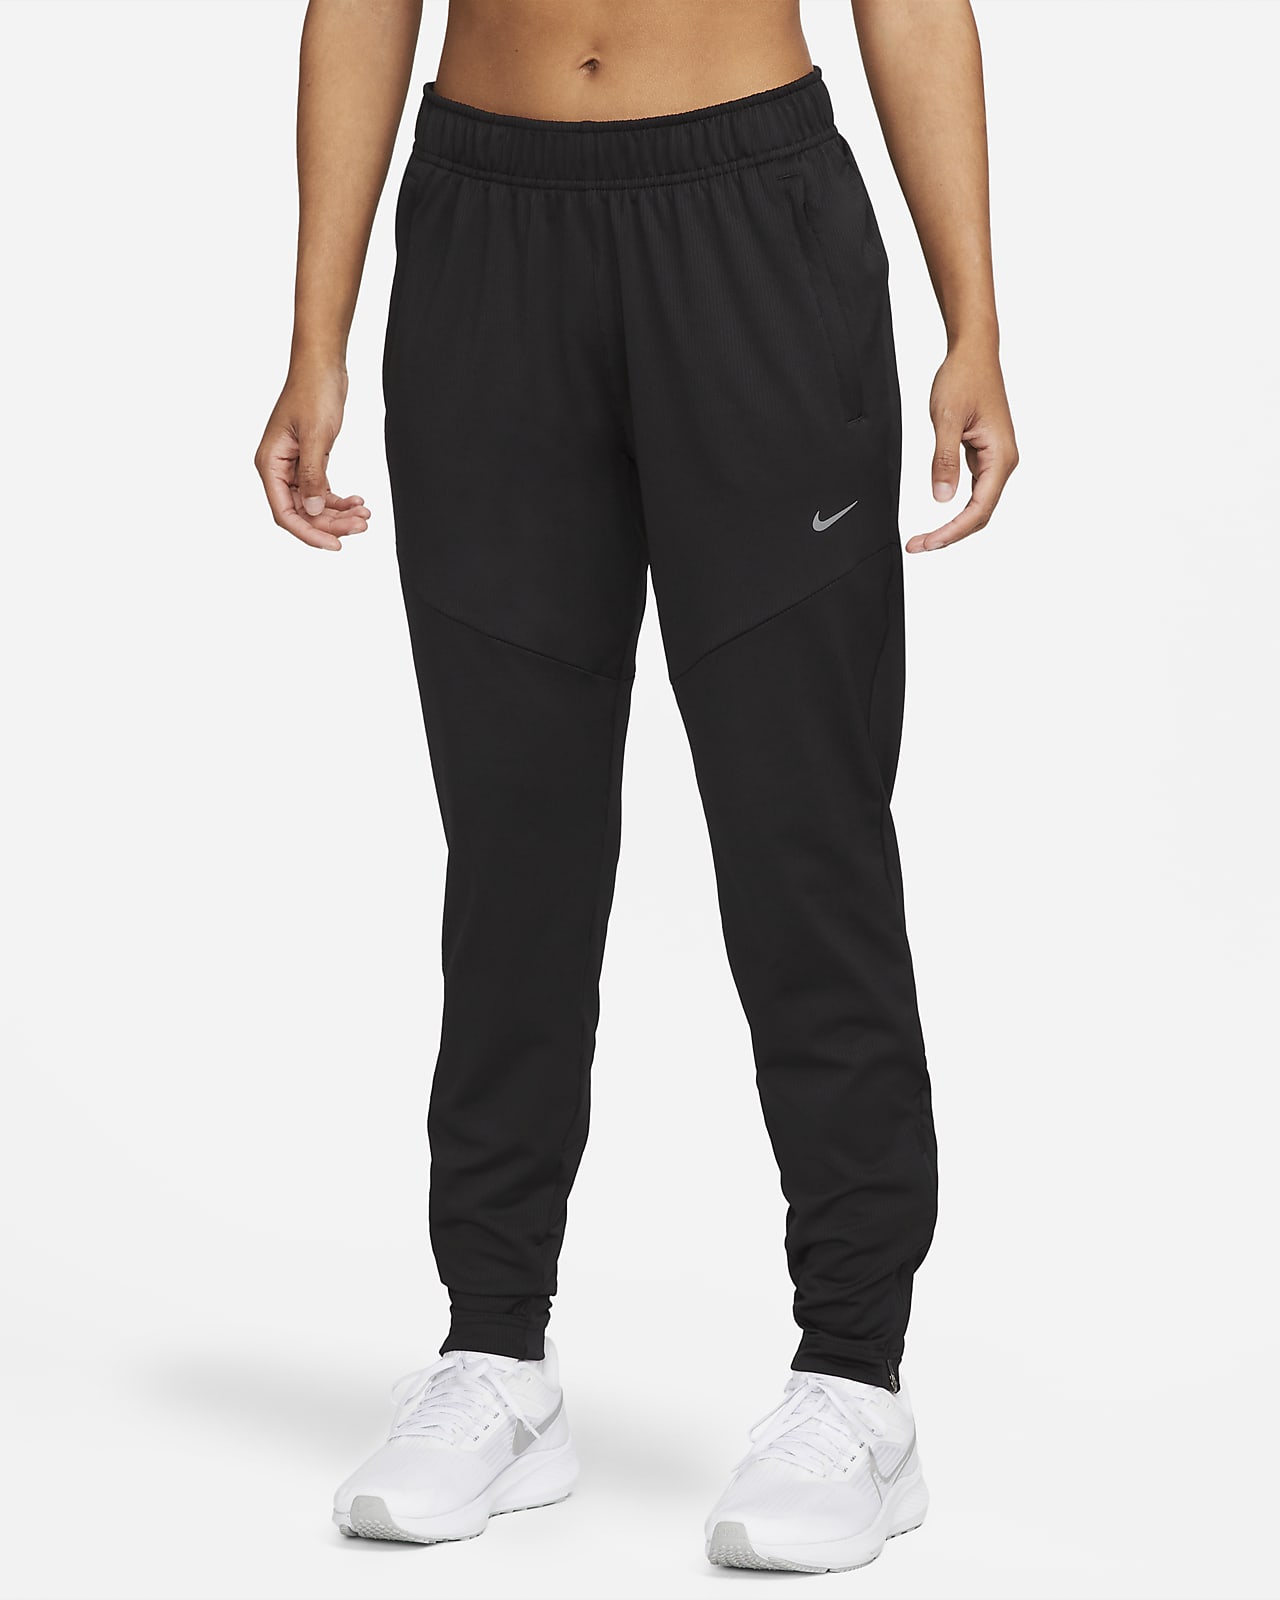 Essential Women's Running Trousers. SA